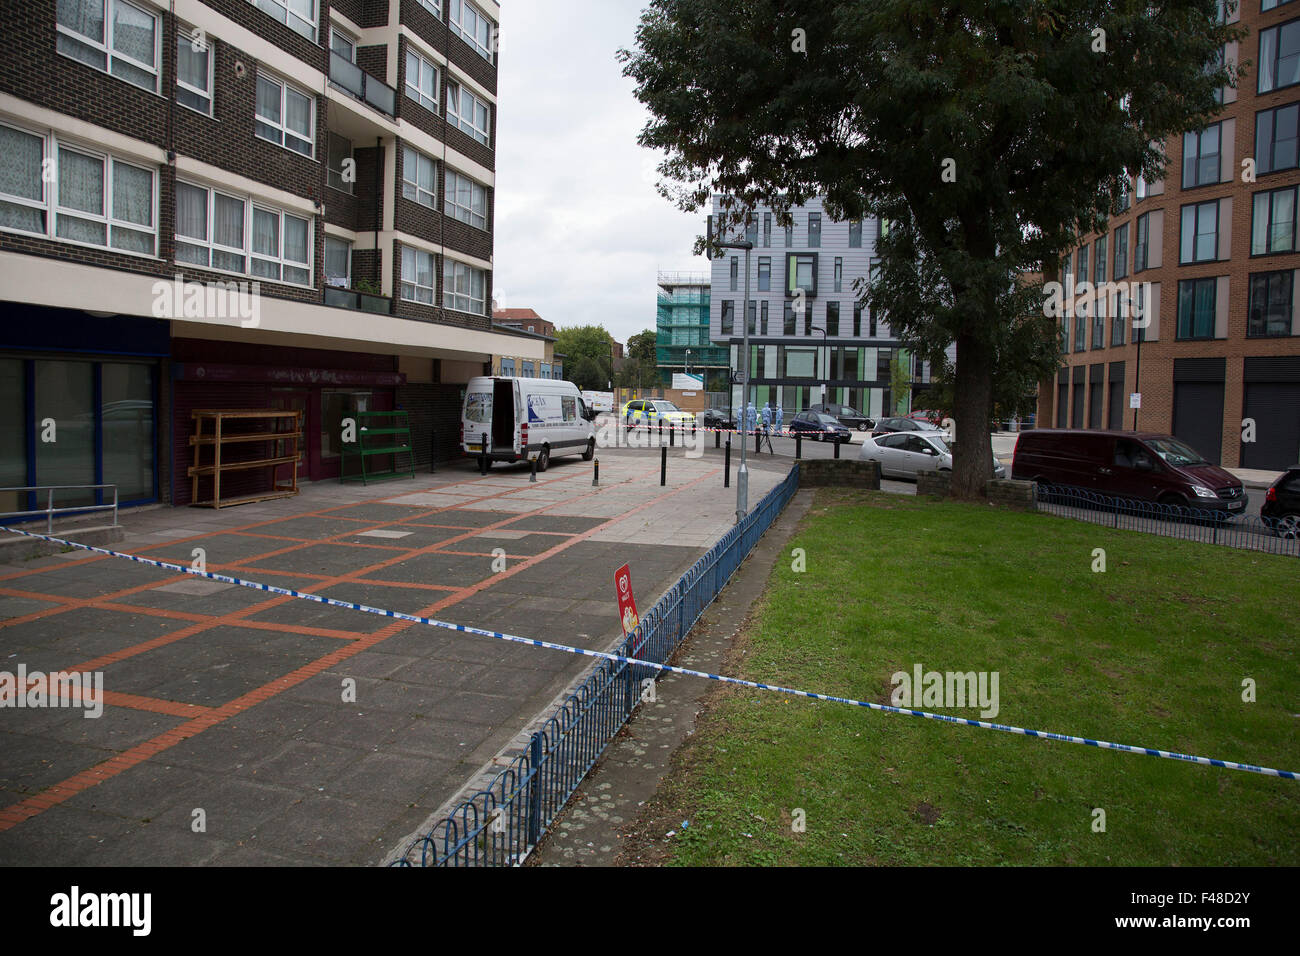 Hackney, London, UK. 15th October, 2015. Crime scene where a male police officer was shot during a firearms operation in Scriven Street in the Haggerston area of Hackney. A specialist firearms unit and officers from Trident Area Crime Command, which is responsible for tackling gang crime, were conducting an operation in Scriven Street at the time of the shooting. Credit:  Michael Kemp/Alamy Live News Stock Photo